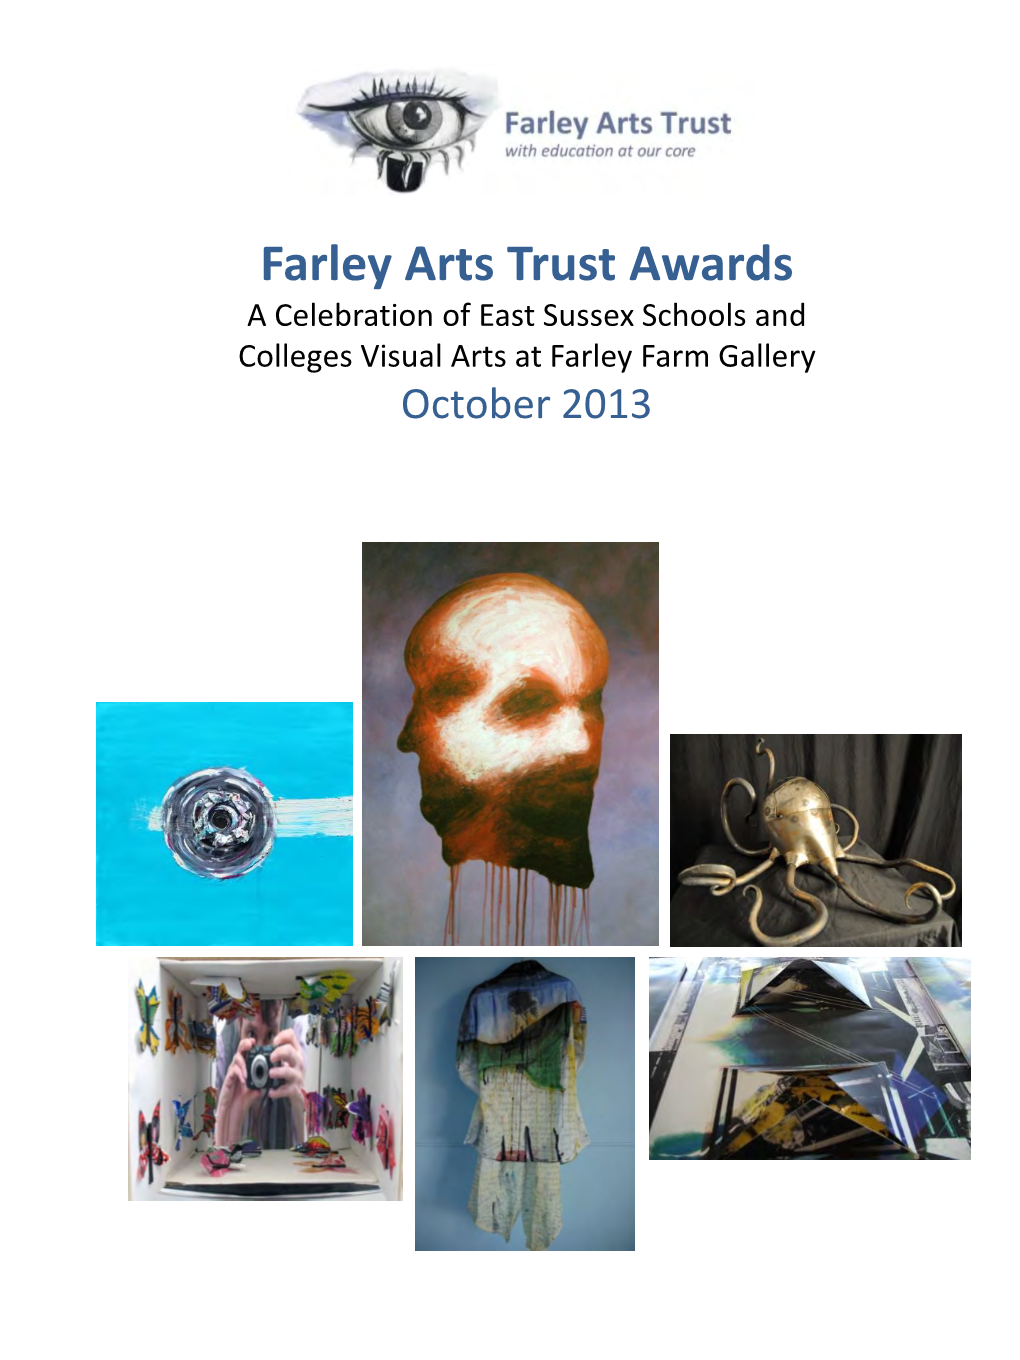 Farley Arts Trust Awards a Celebration of East Sussex Schools and Colleges Visual Arts at Farley Farm Gallery October 2013 Acknowledgments